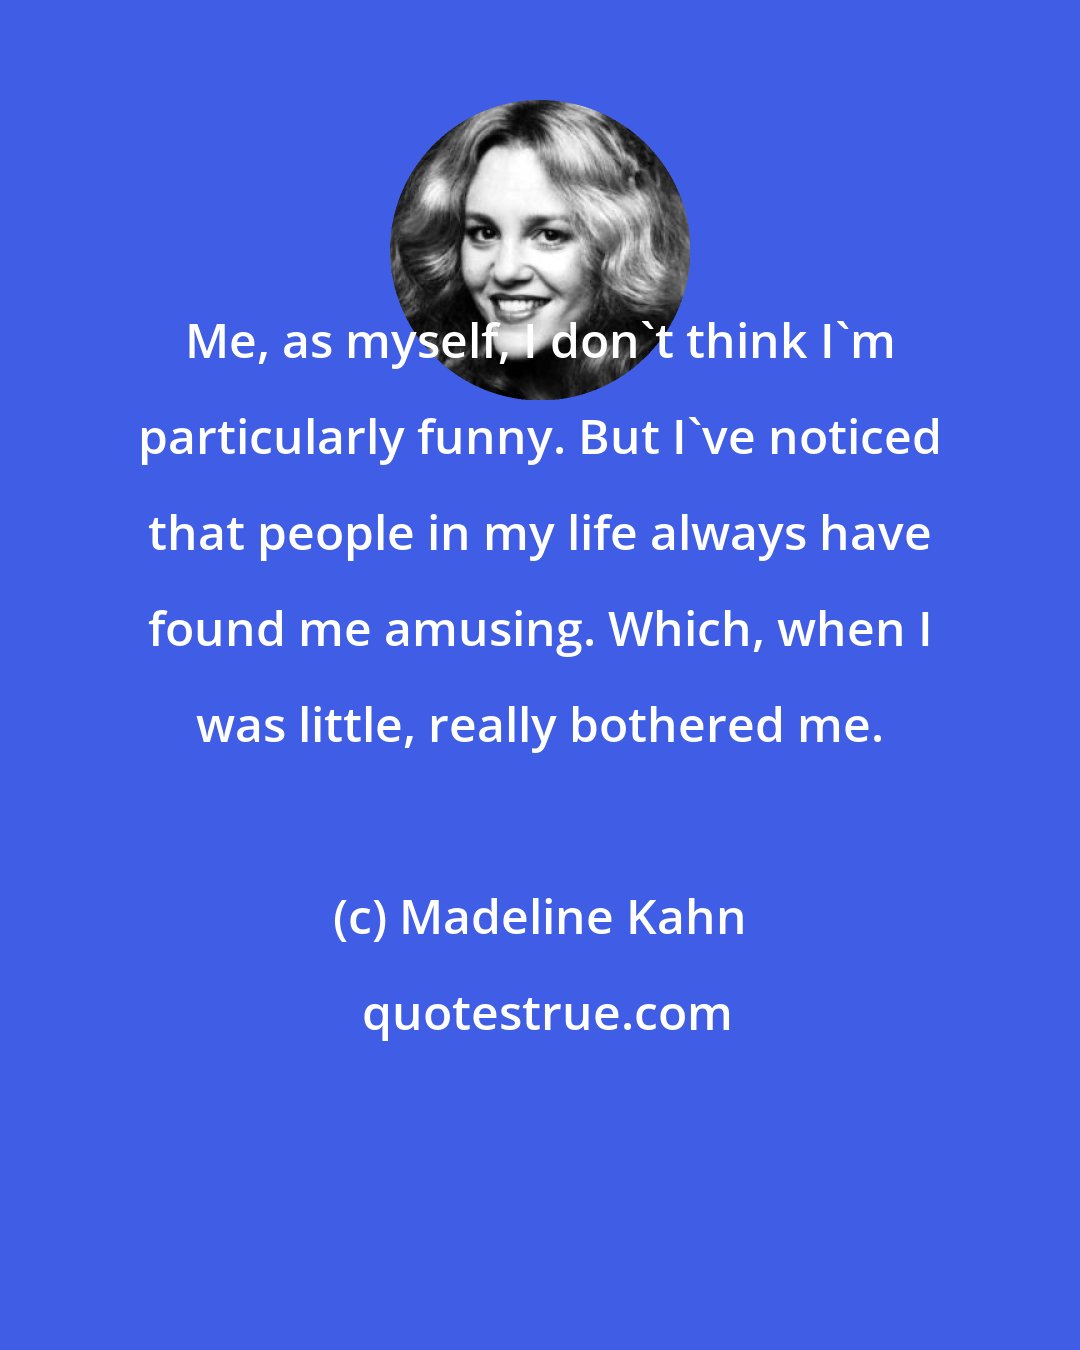 Madeline Kahn: Me, as myself, I don't think I'm particularly funny. But I've noticed that people in my life always have found me amusing. Which, when I was little, really bothered me.